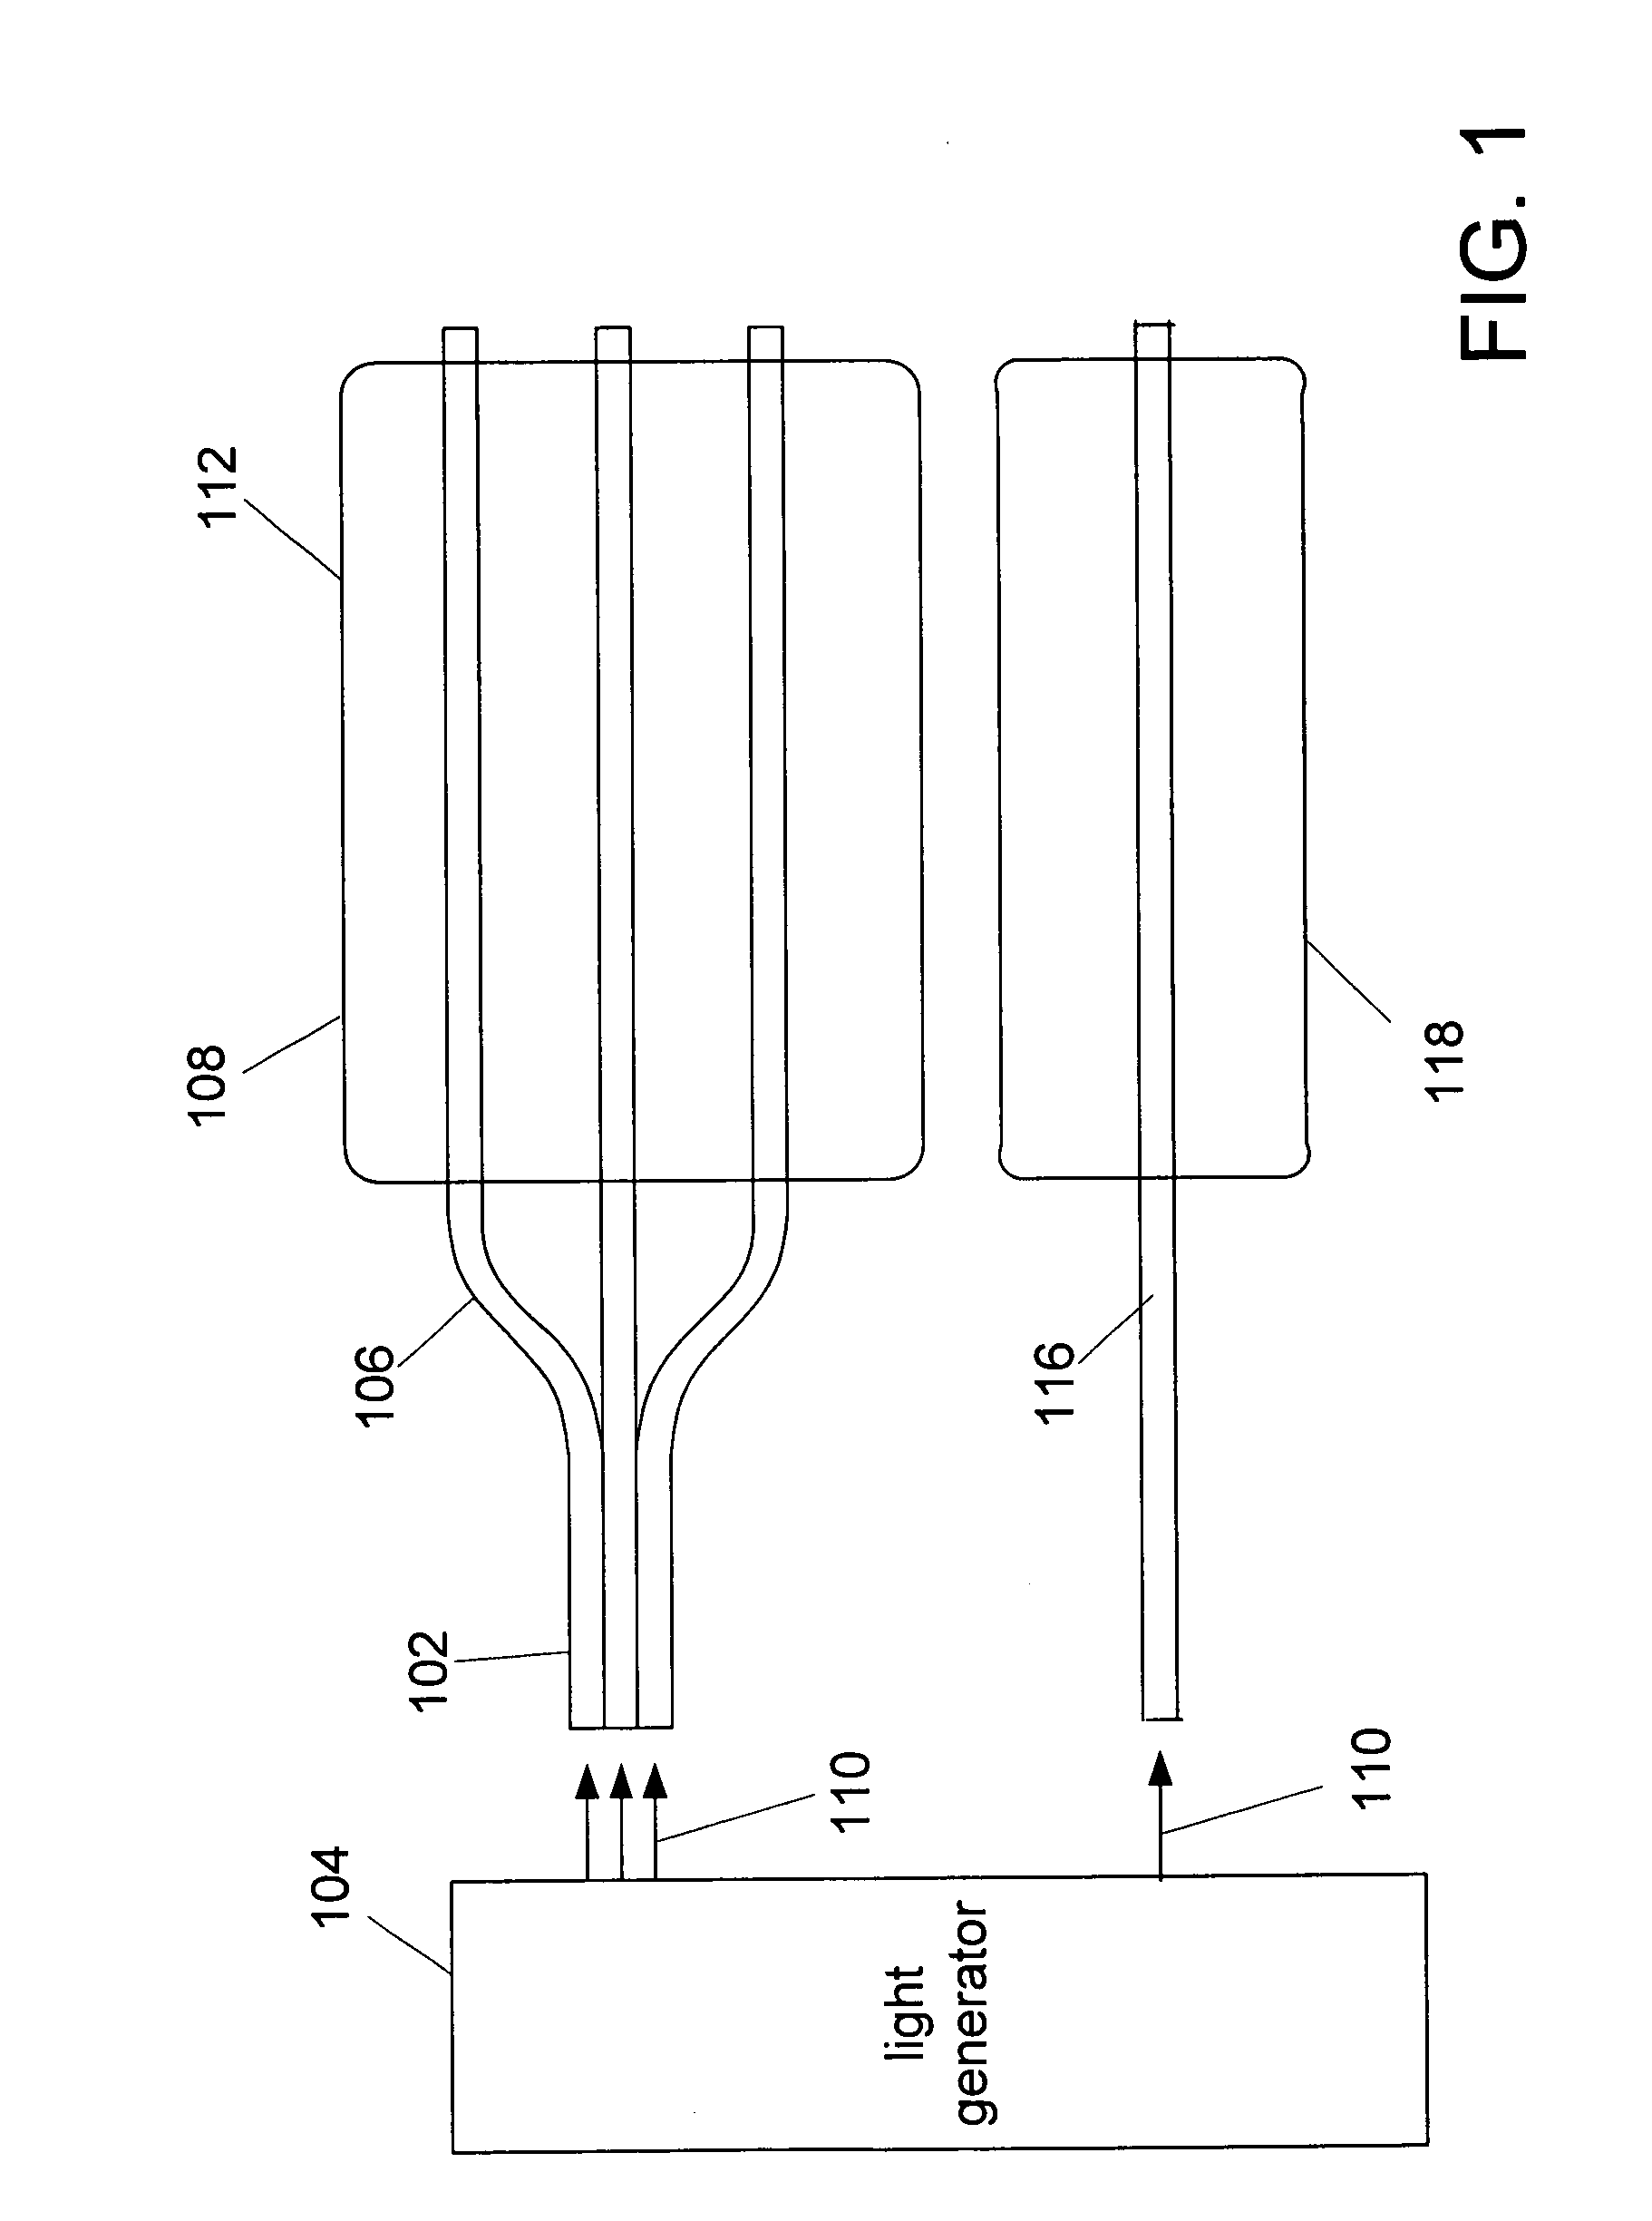 Light-activated semiconductor switches